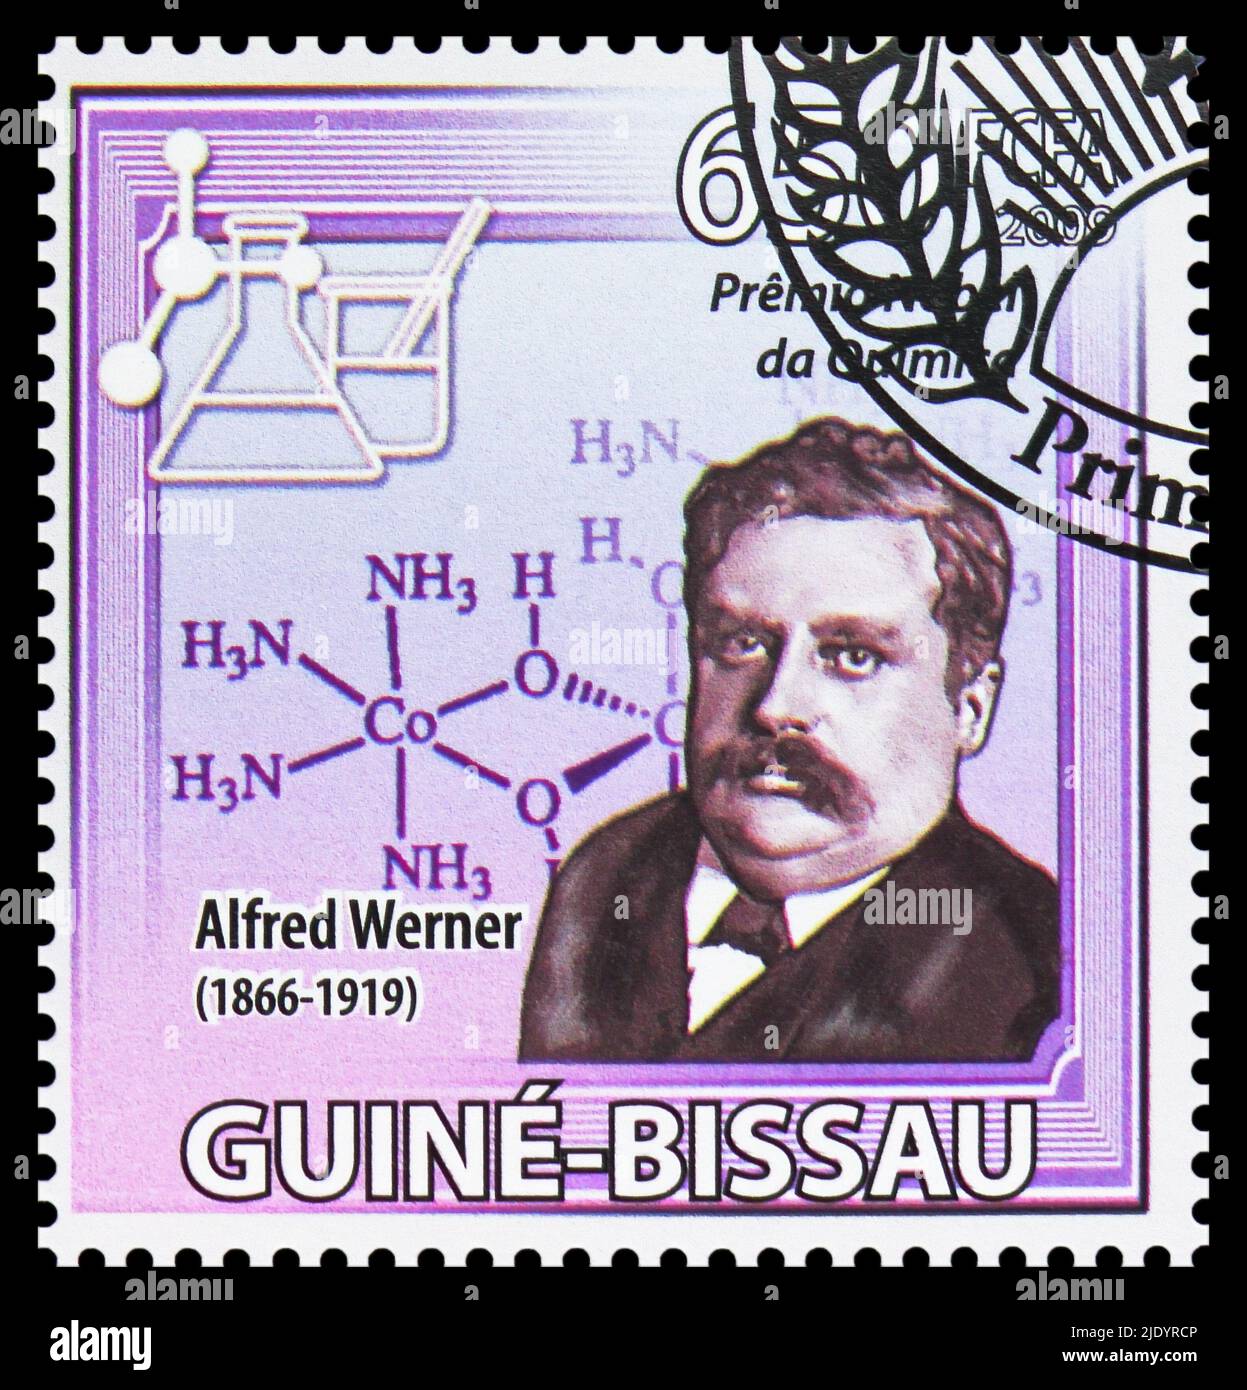 MOSCOW, RUSSIA - JUNE 17, 2022: Postage stamp printed in Guinea-Bissau shows Alfred Werner, Nobel Prize serie, circa 2009 Stock Photo